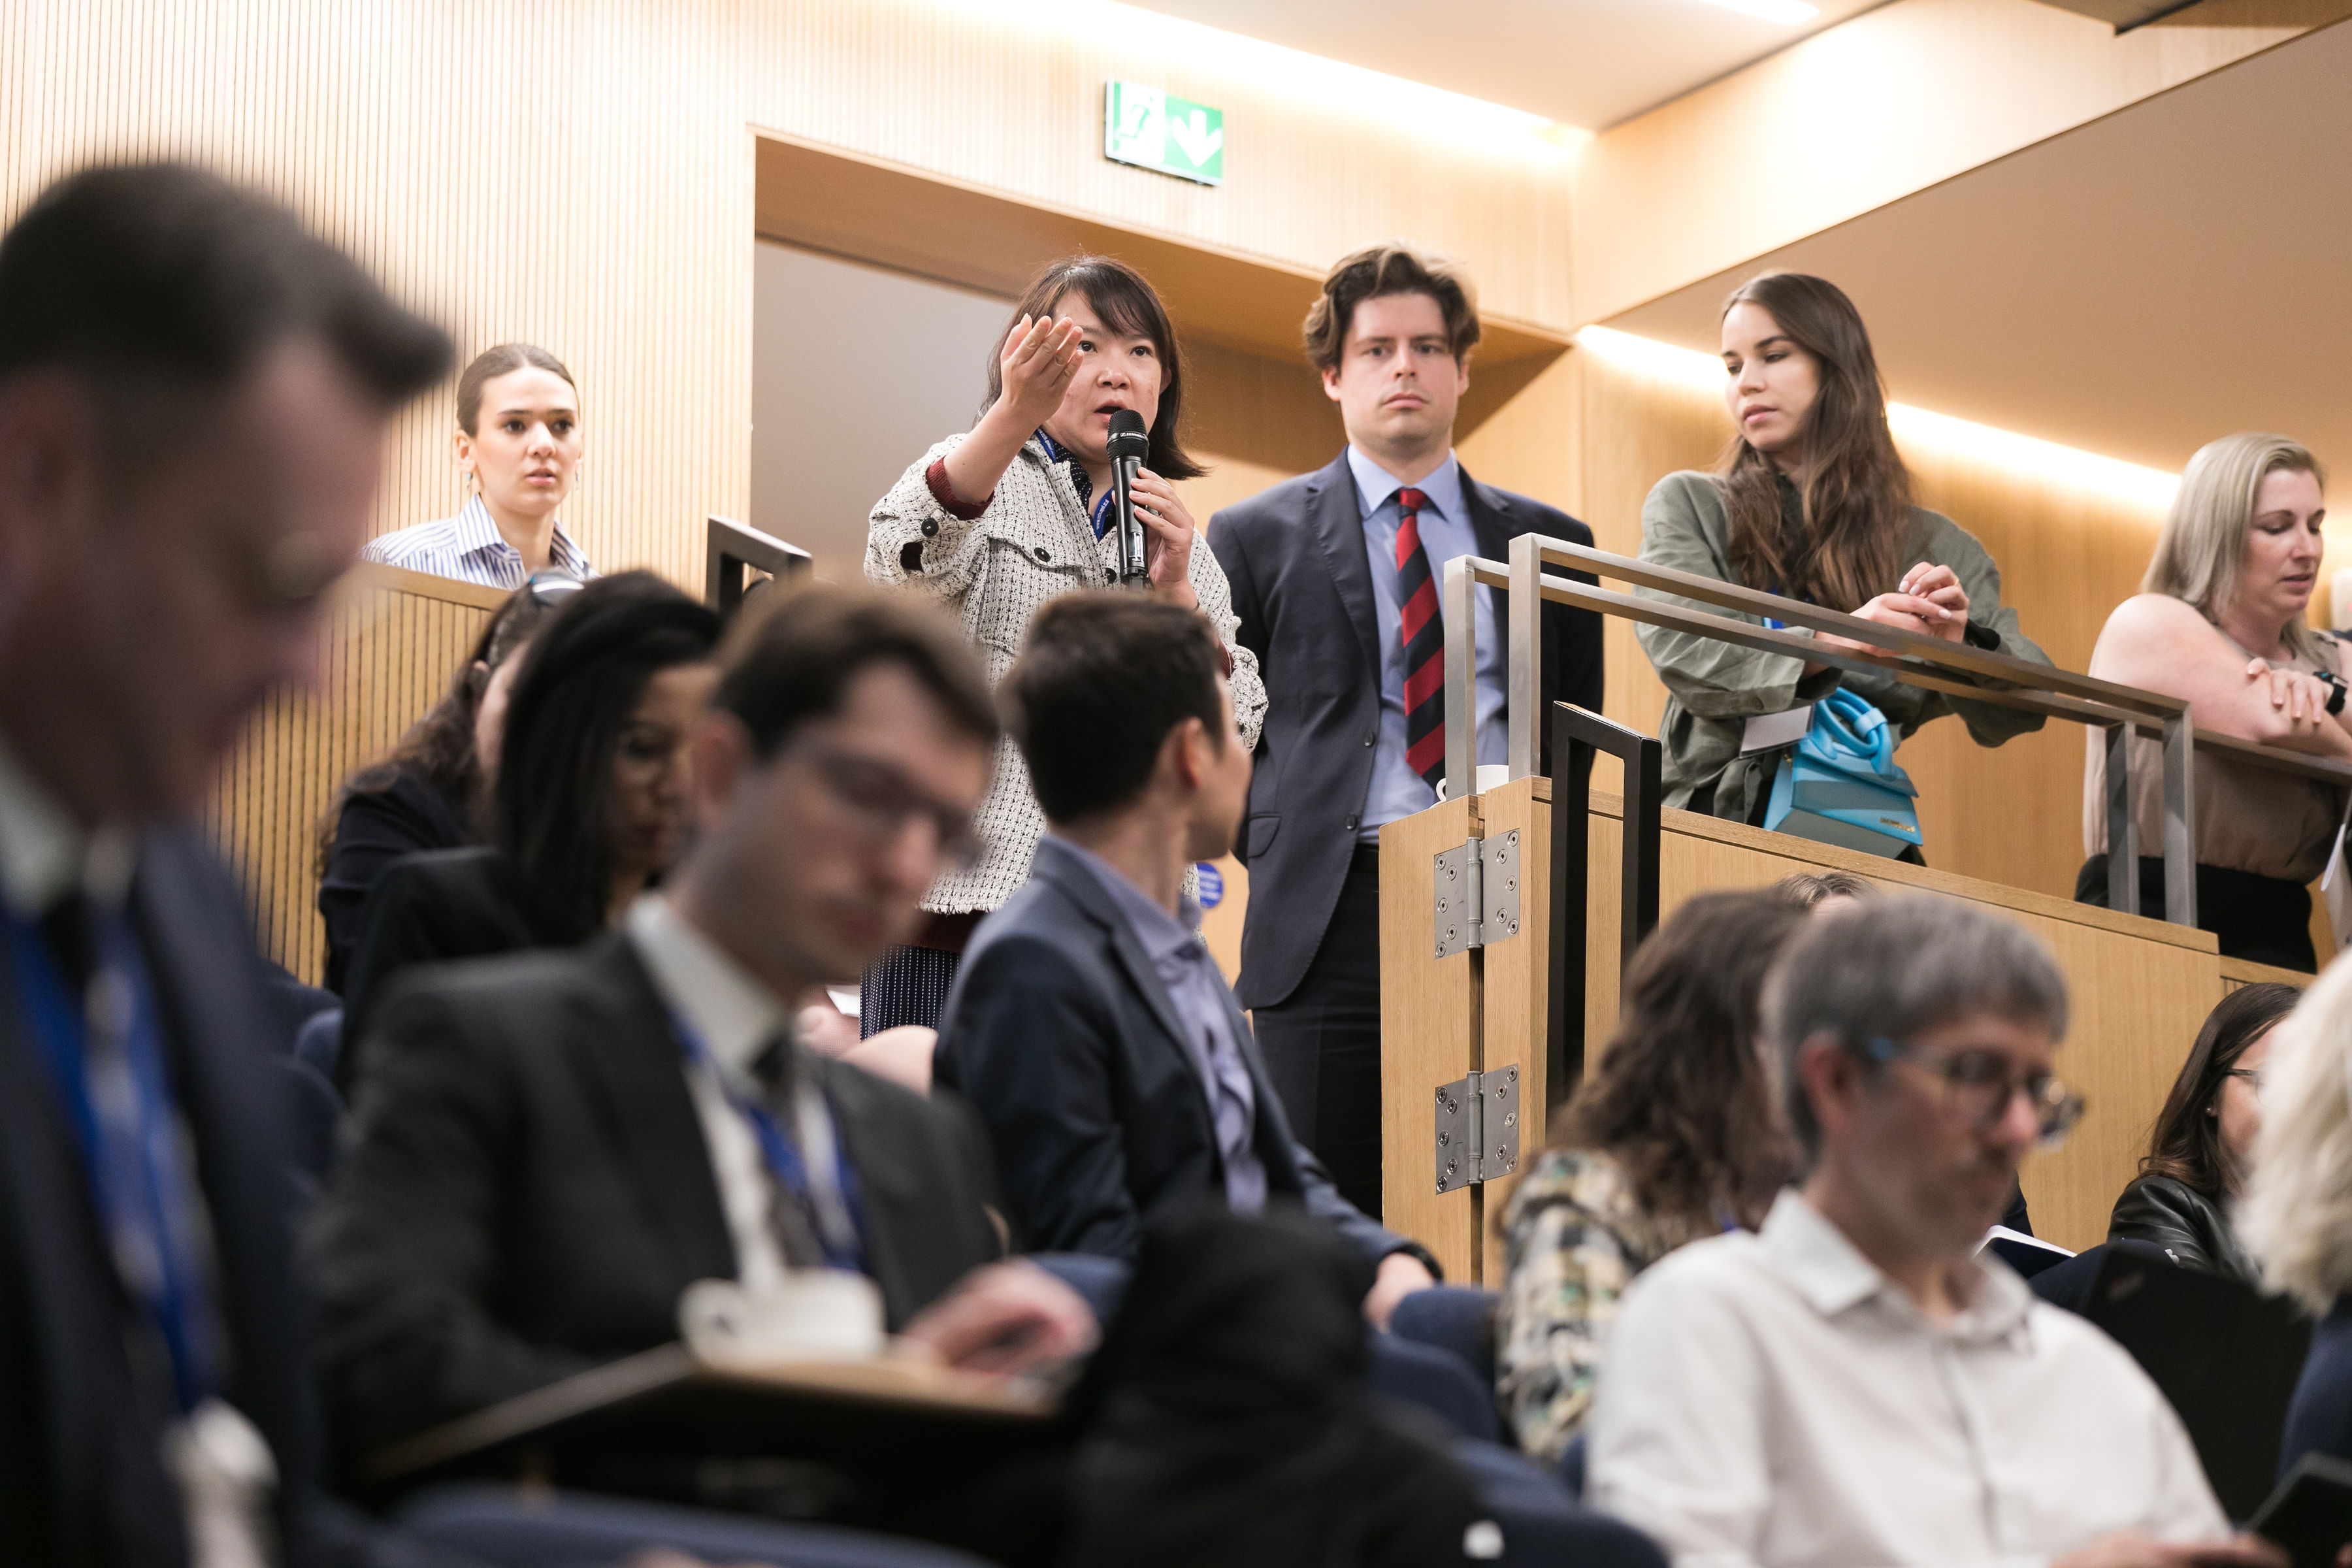 A participant asking question to the panel at QMIPRI Conference 2022